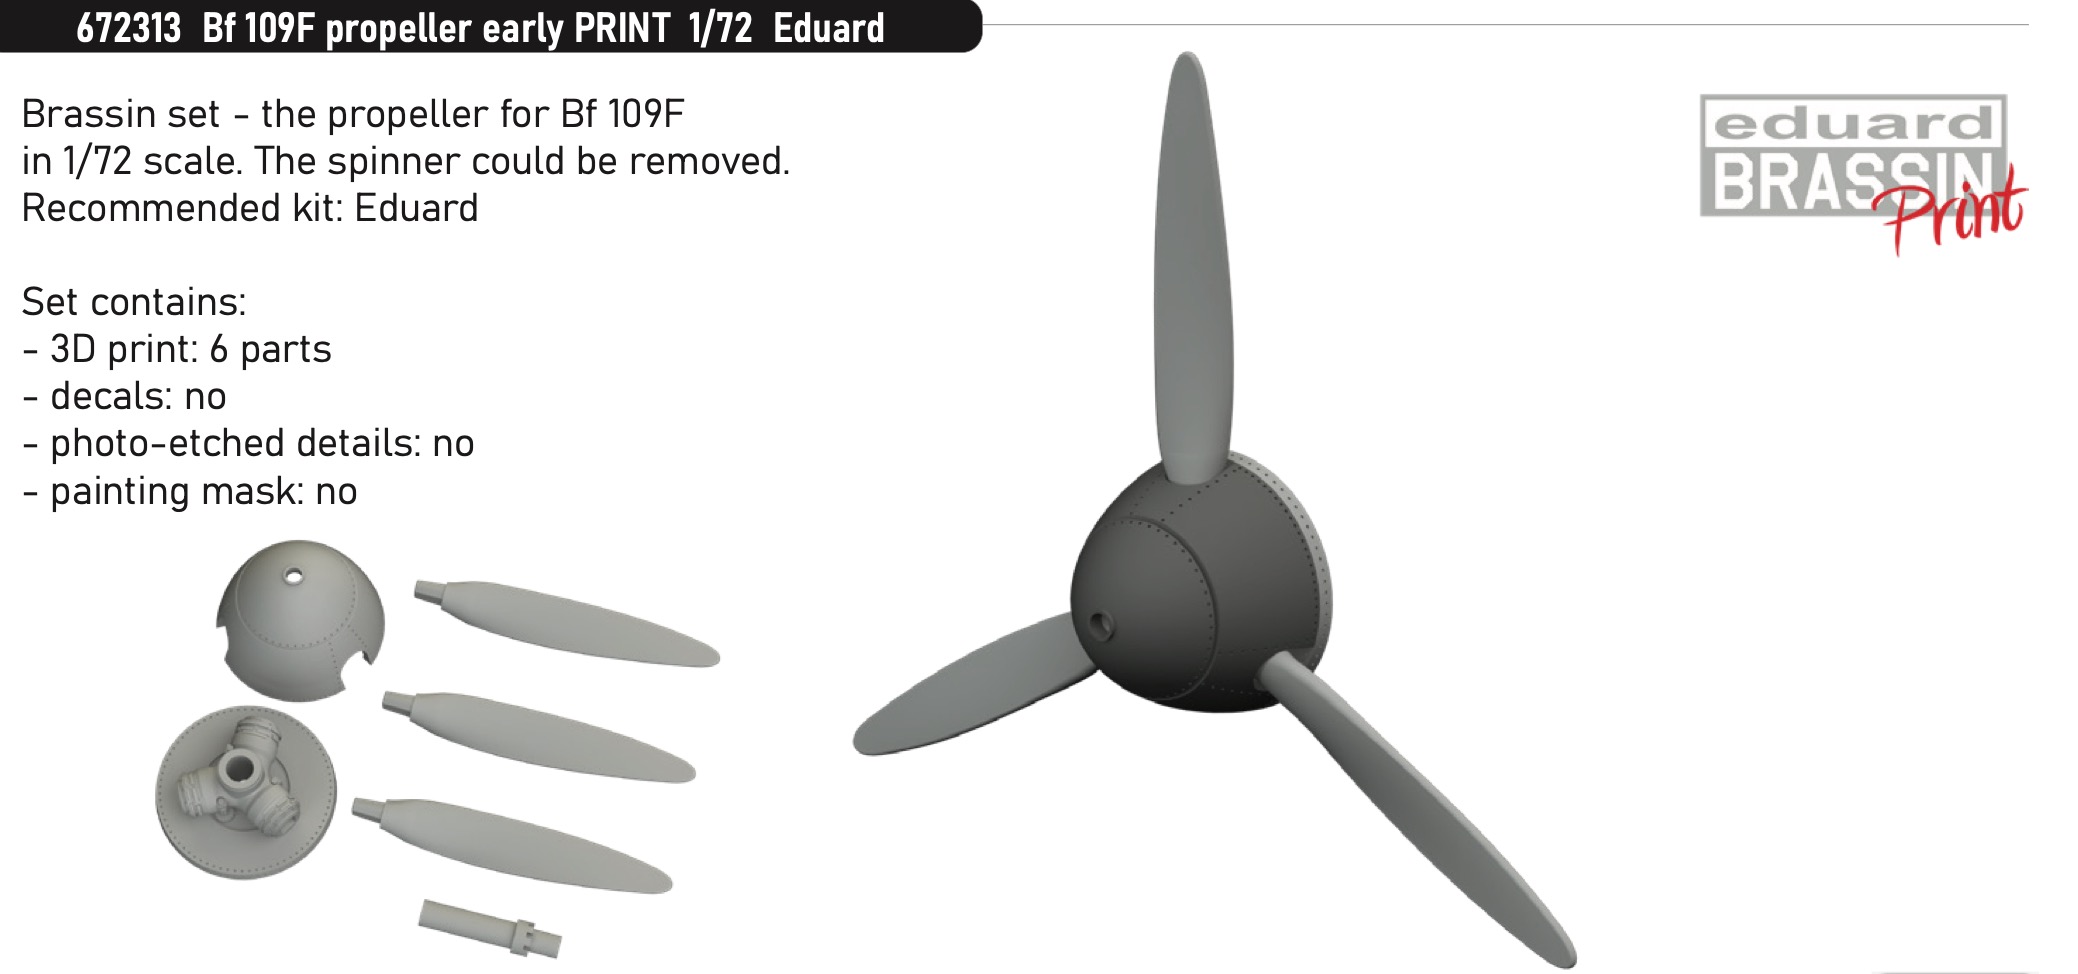 Additions (3D resin printing) 1/72 Messerschmitt Bf-109F propeller early 3D-Printed (designed to be used with Eduard kits) 